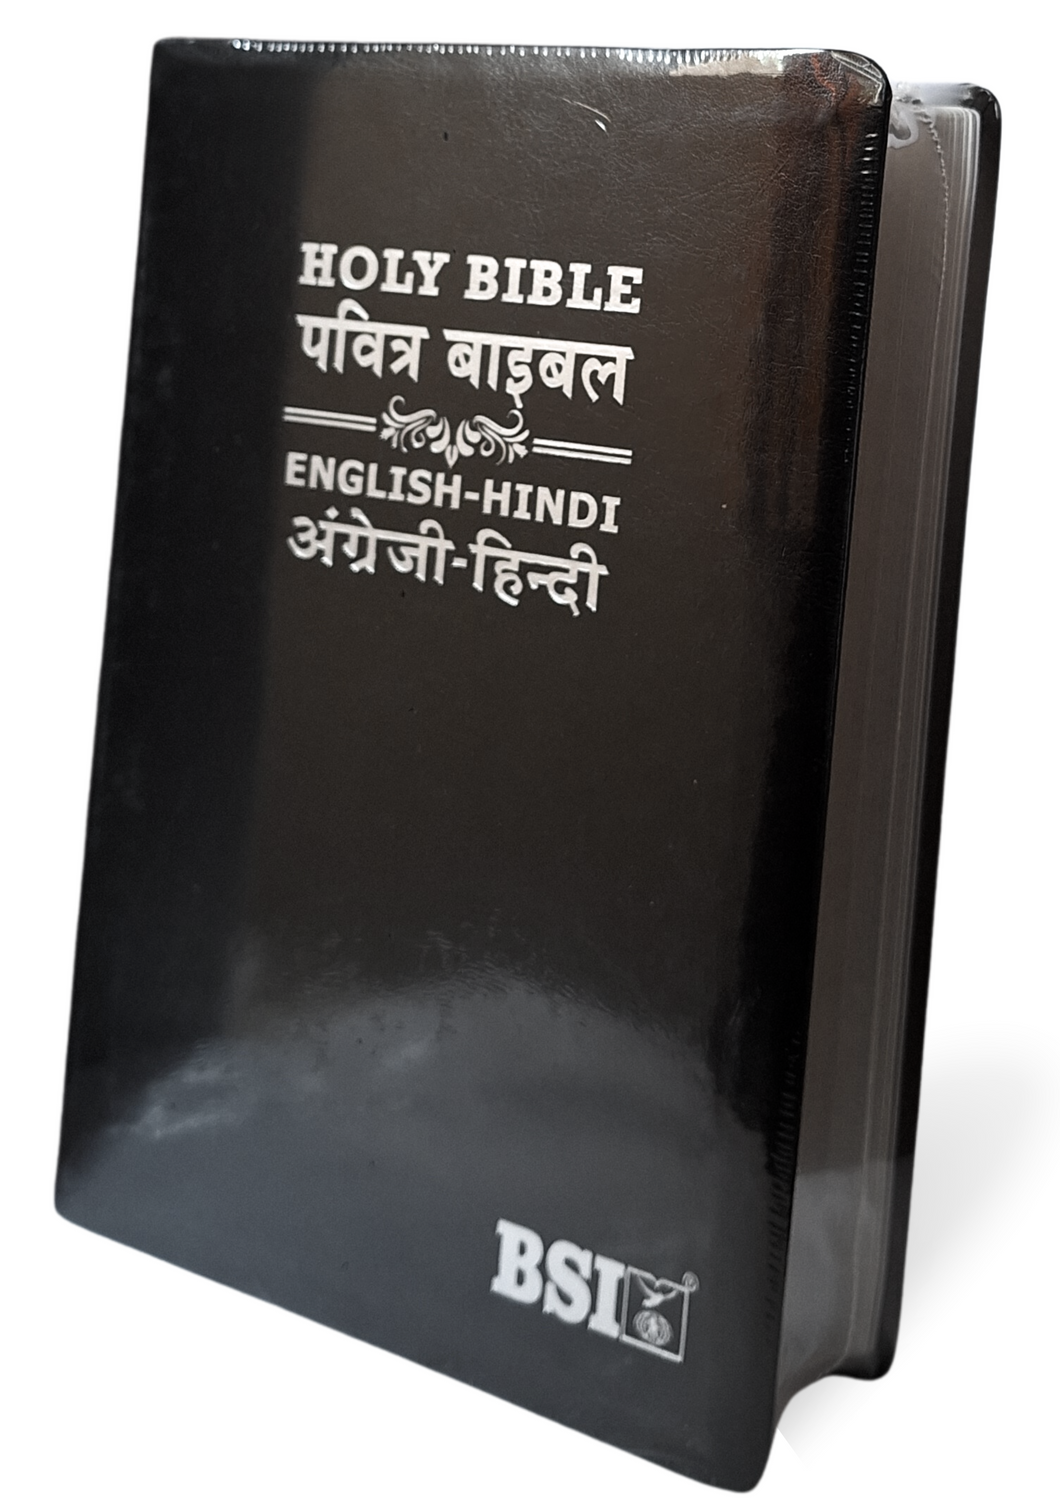 Bilingual Holy Bible English - Hindi (O.V.) Diglot, PU Yapp Containing Old and New Testament BSI Leather Bound